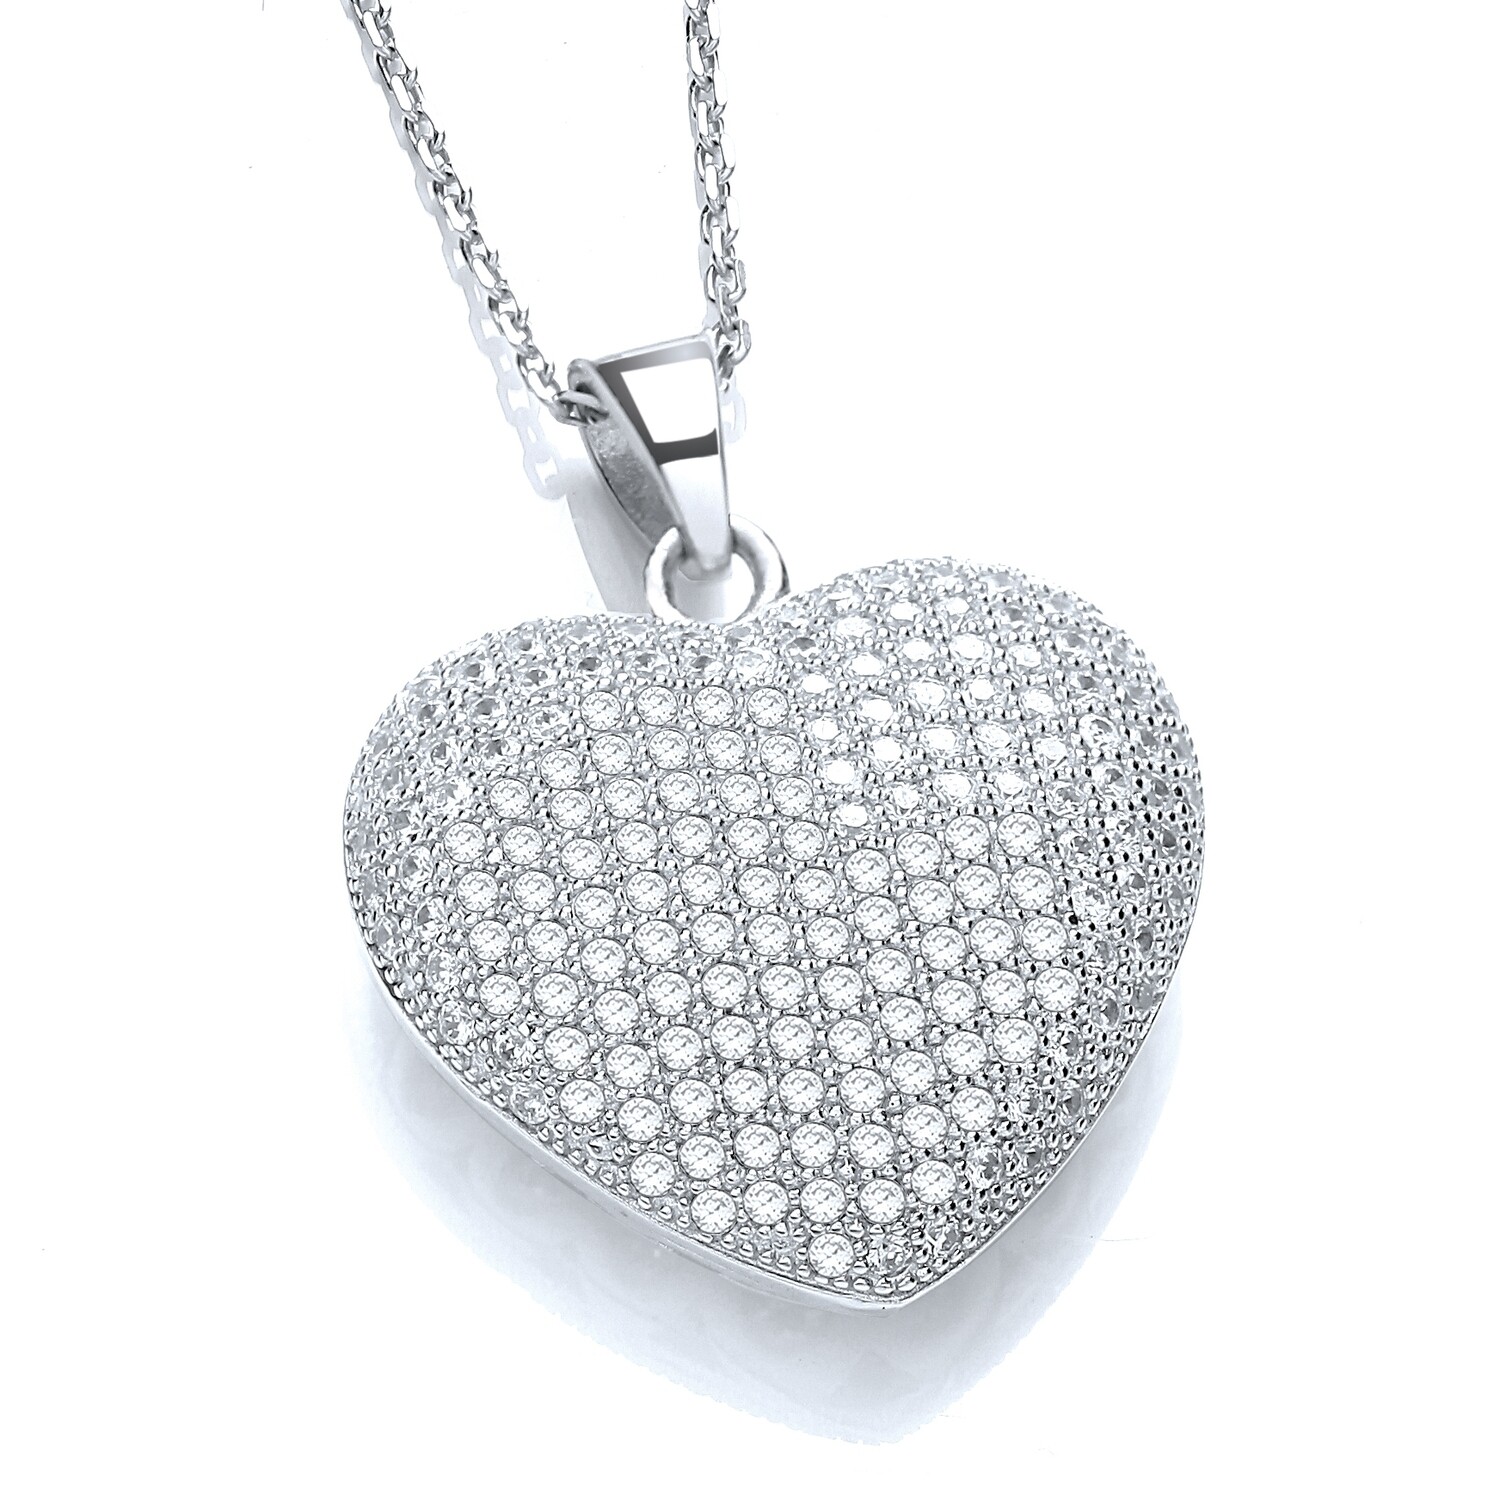 Silver and CZ heart pendant